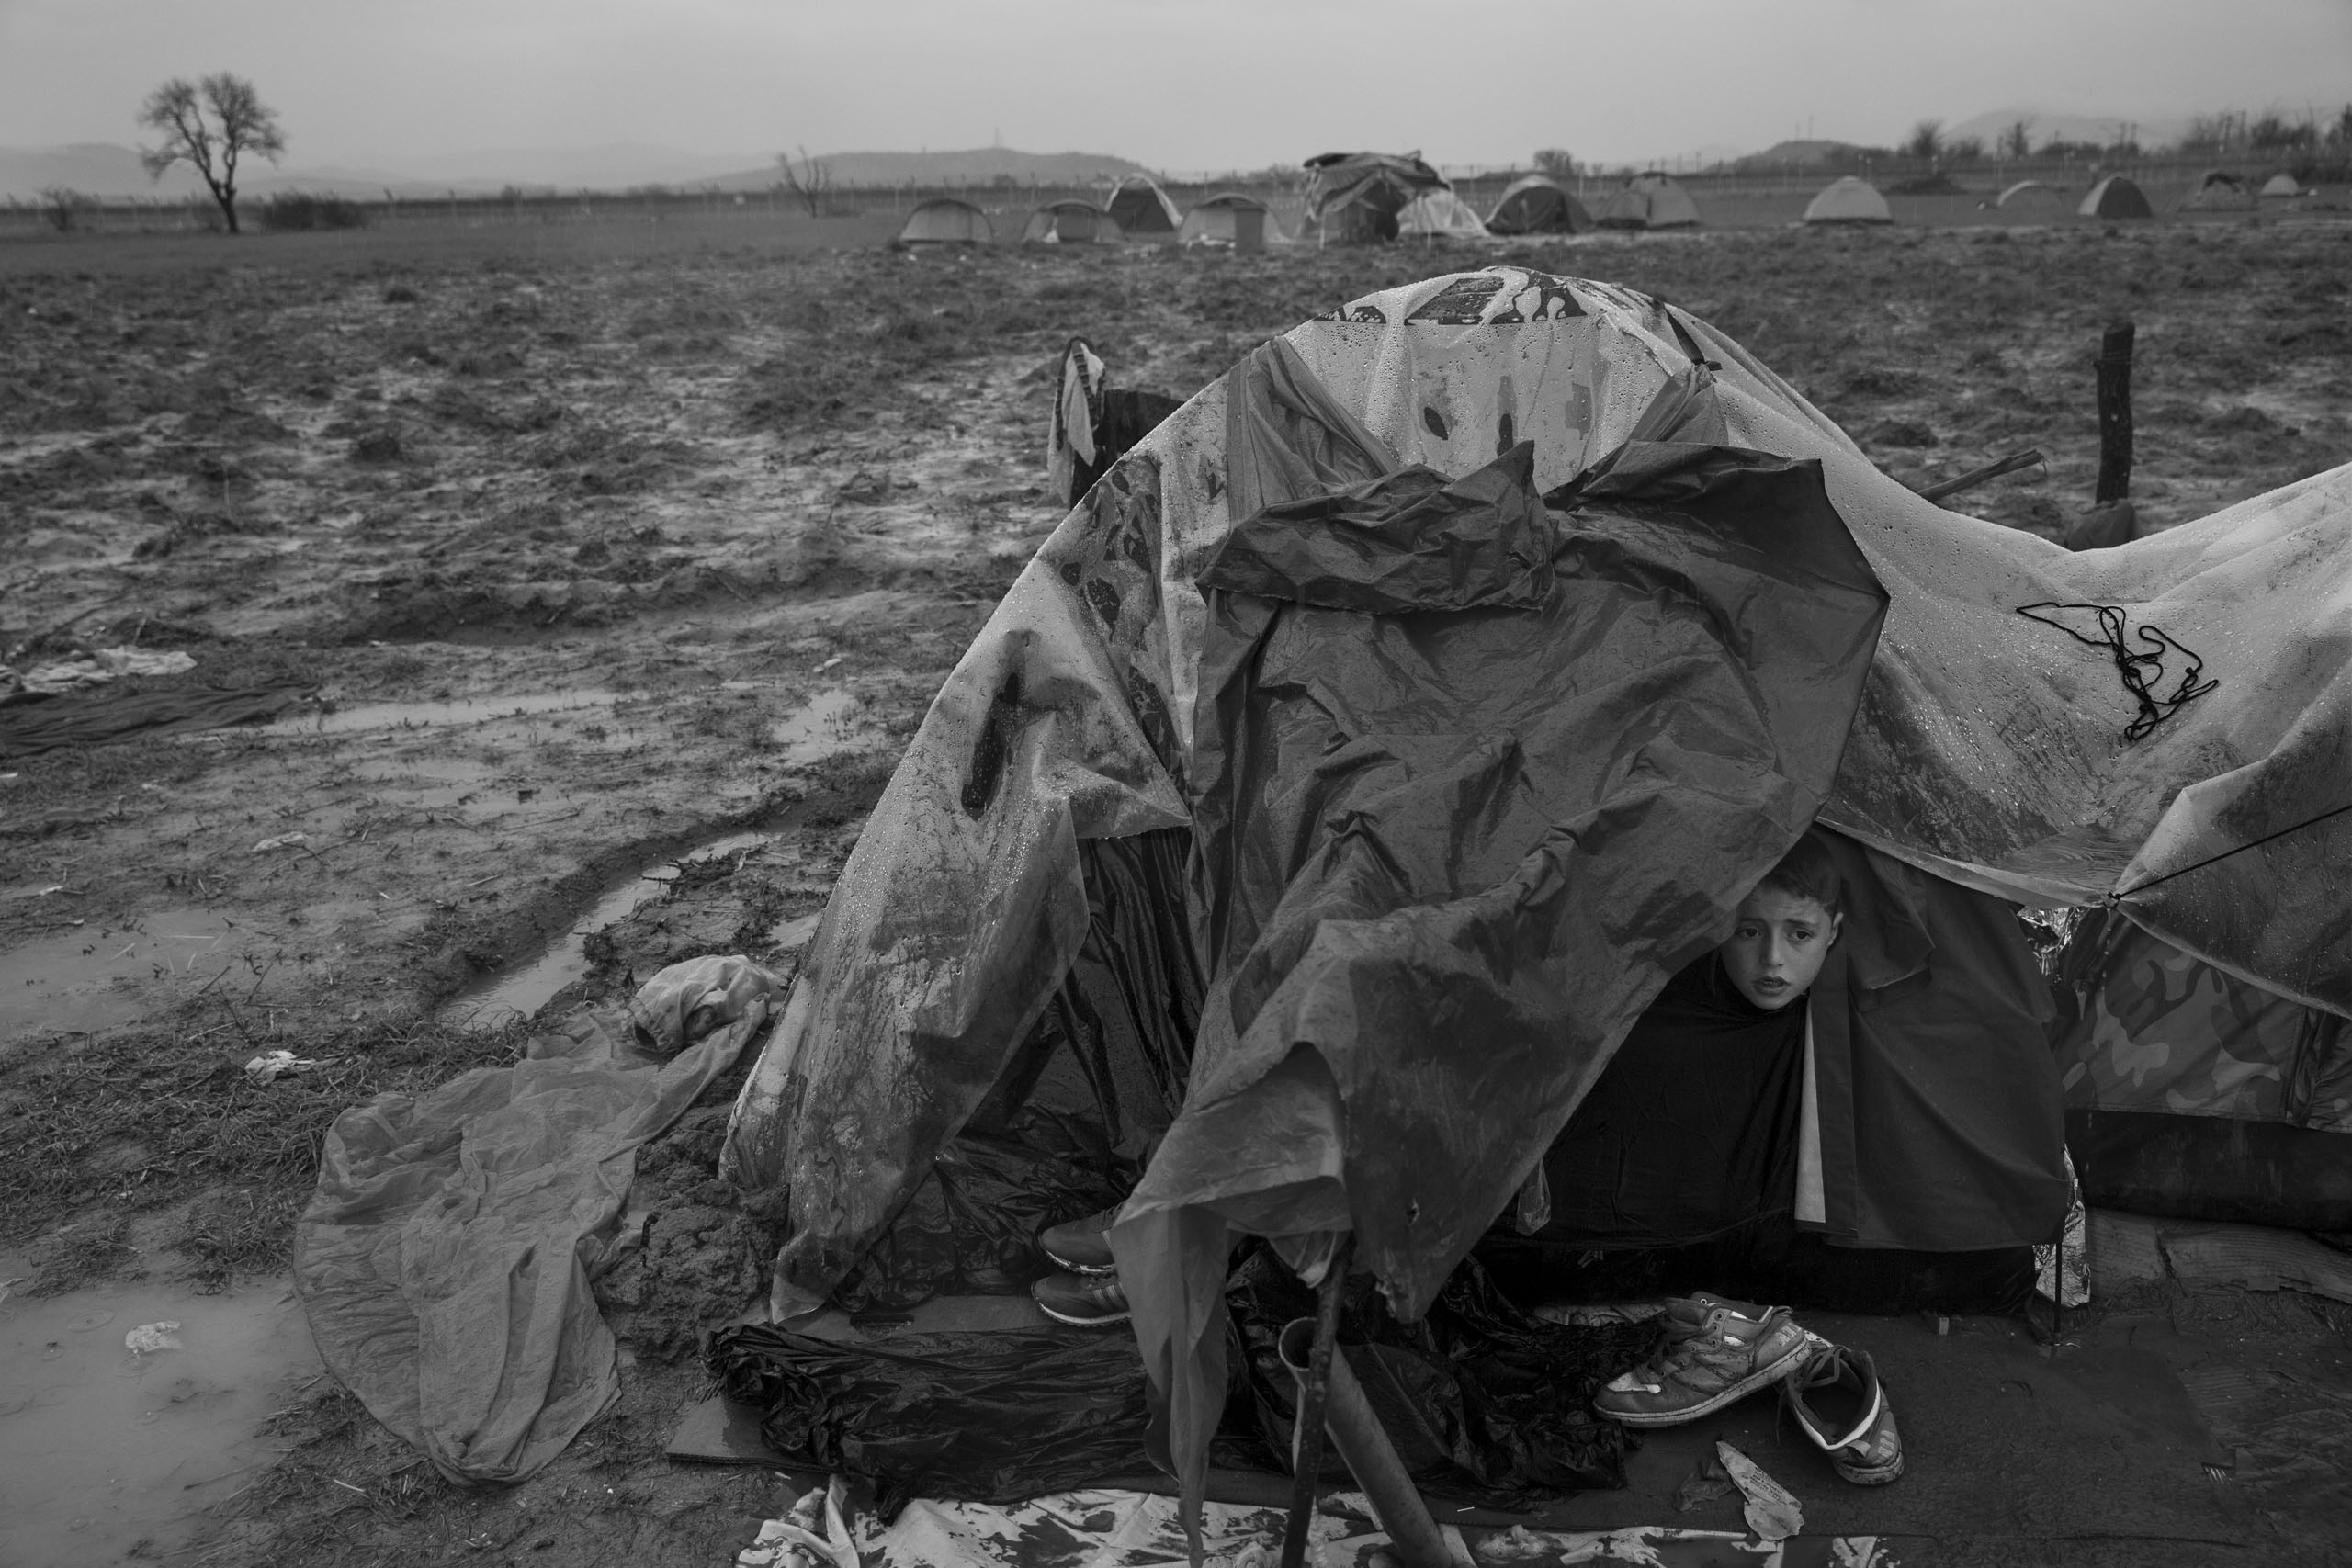 A boy peers out of a tent at a  refugee camp in Greece at the Macedonian border, where 12,000 inhabitants—nearly all of them Syrians,
                              Iraqis or Afghans—have been huddling in their shelters atop the mud, March 13, 2016.